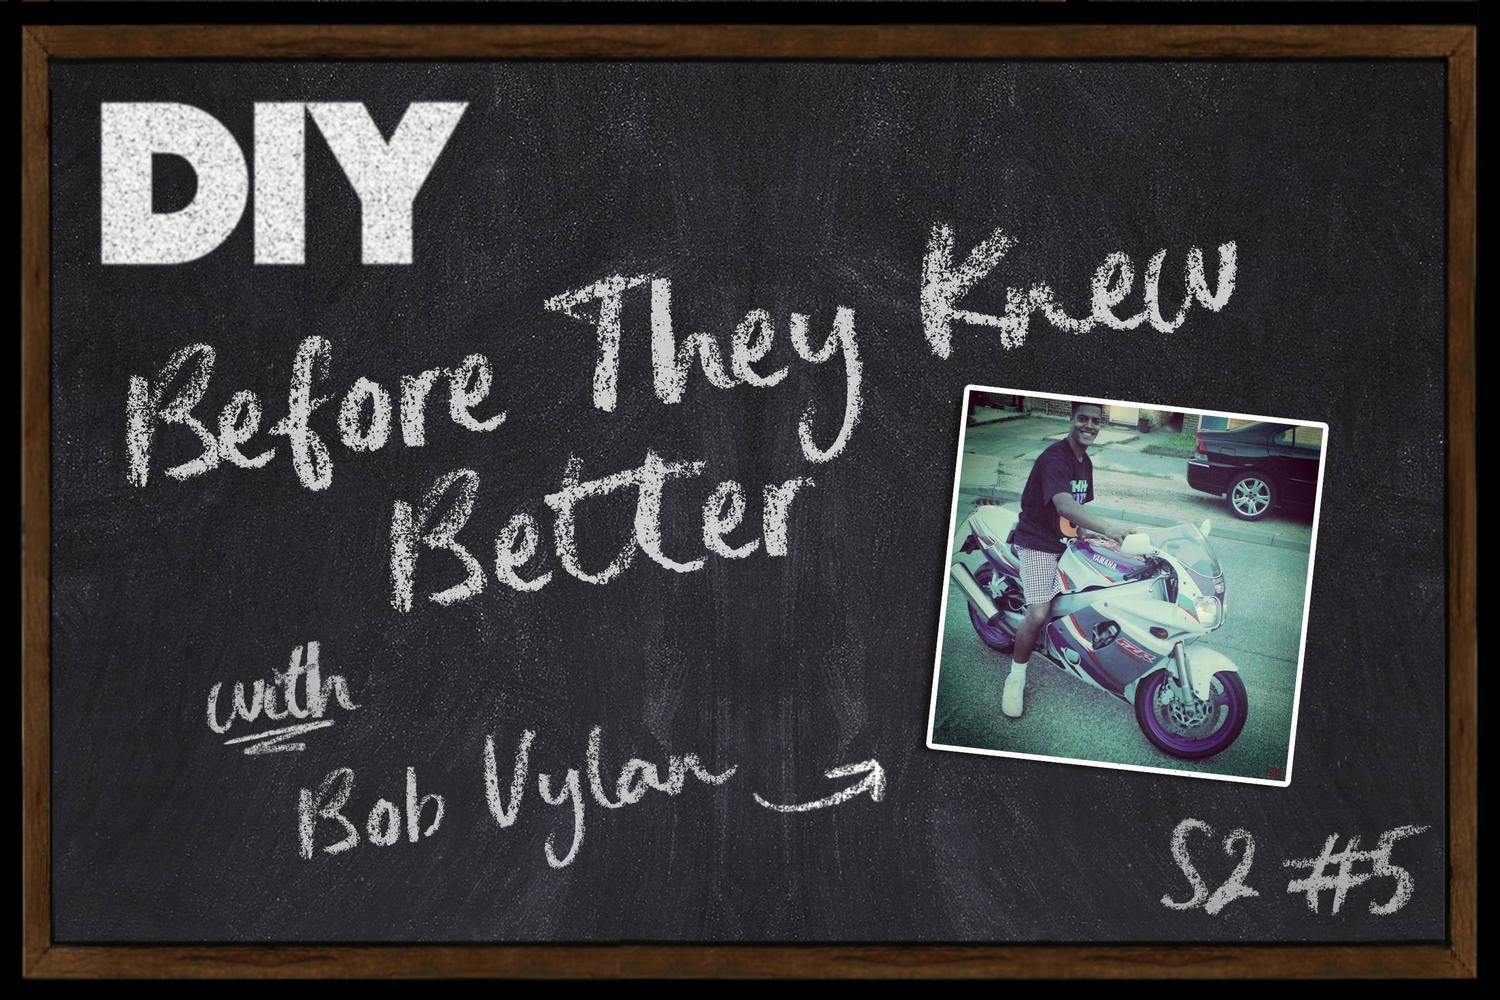 Before They Knew Better welcomes Bobby Vylan as latest guest